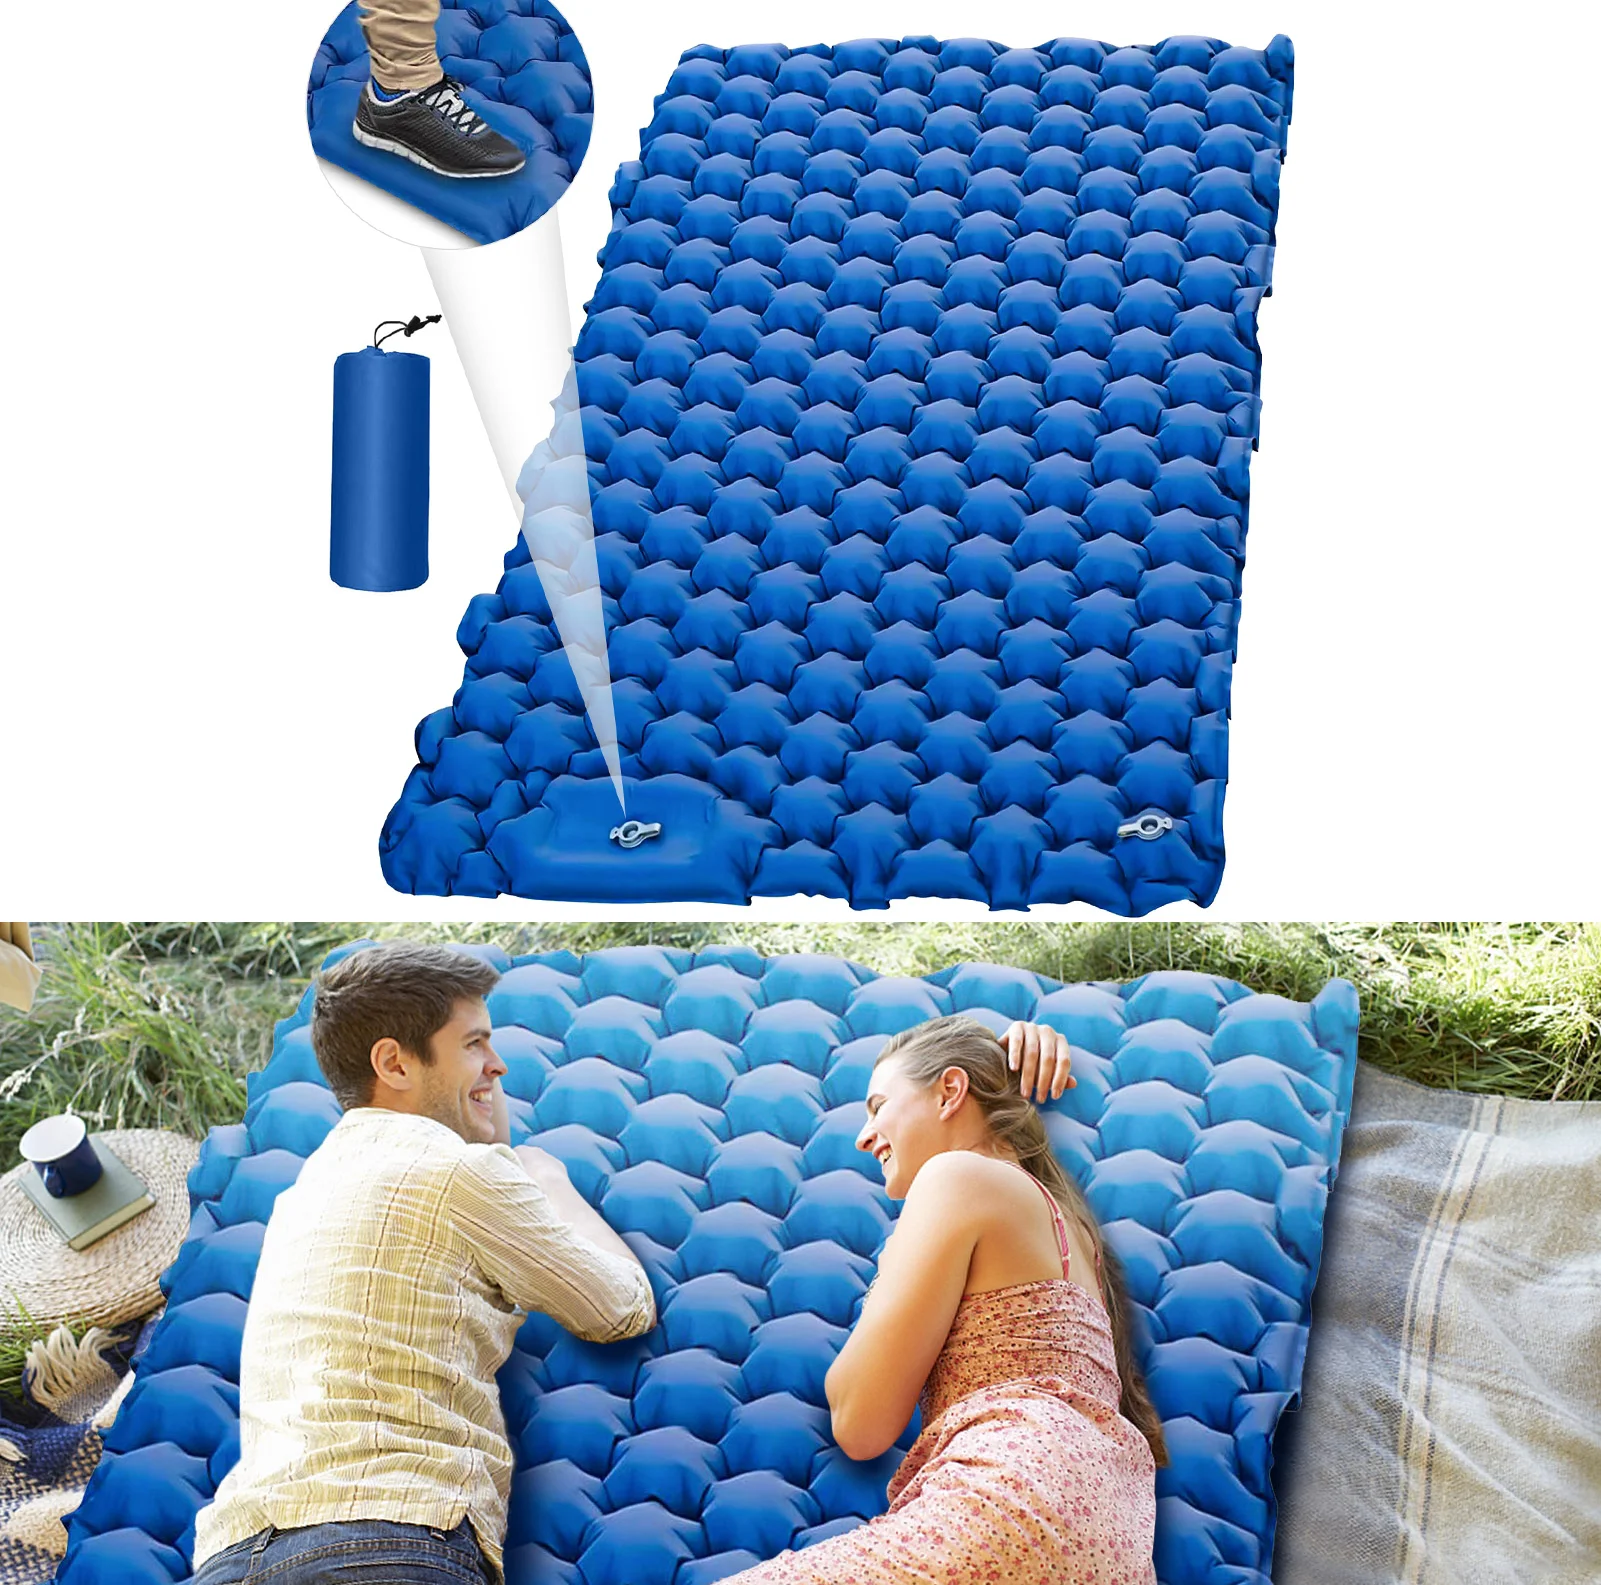 2 Double Camping Sleeping Mat Self Inflatable Outdoor Extra Wide Sleeping Pad Nylon Tup Air Mattress Bed Hiking - 2 Person Double Camping Sleeping Self Inflatable Outdoor Extra Wide